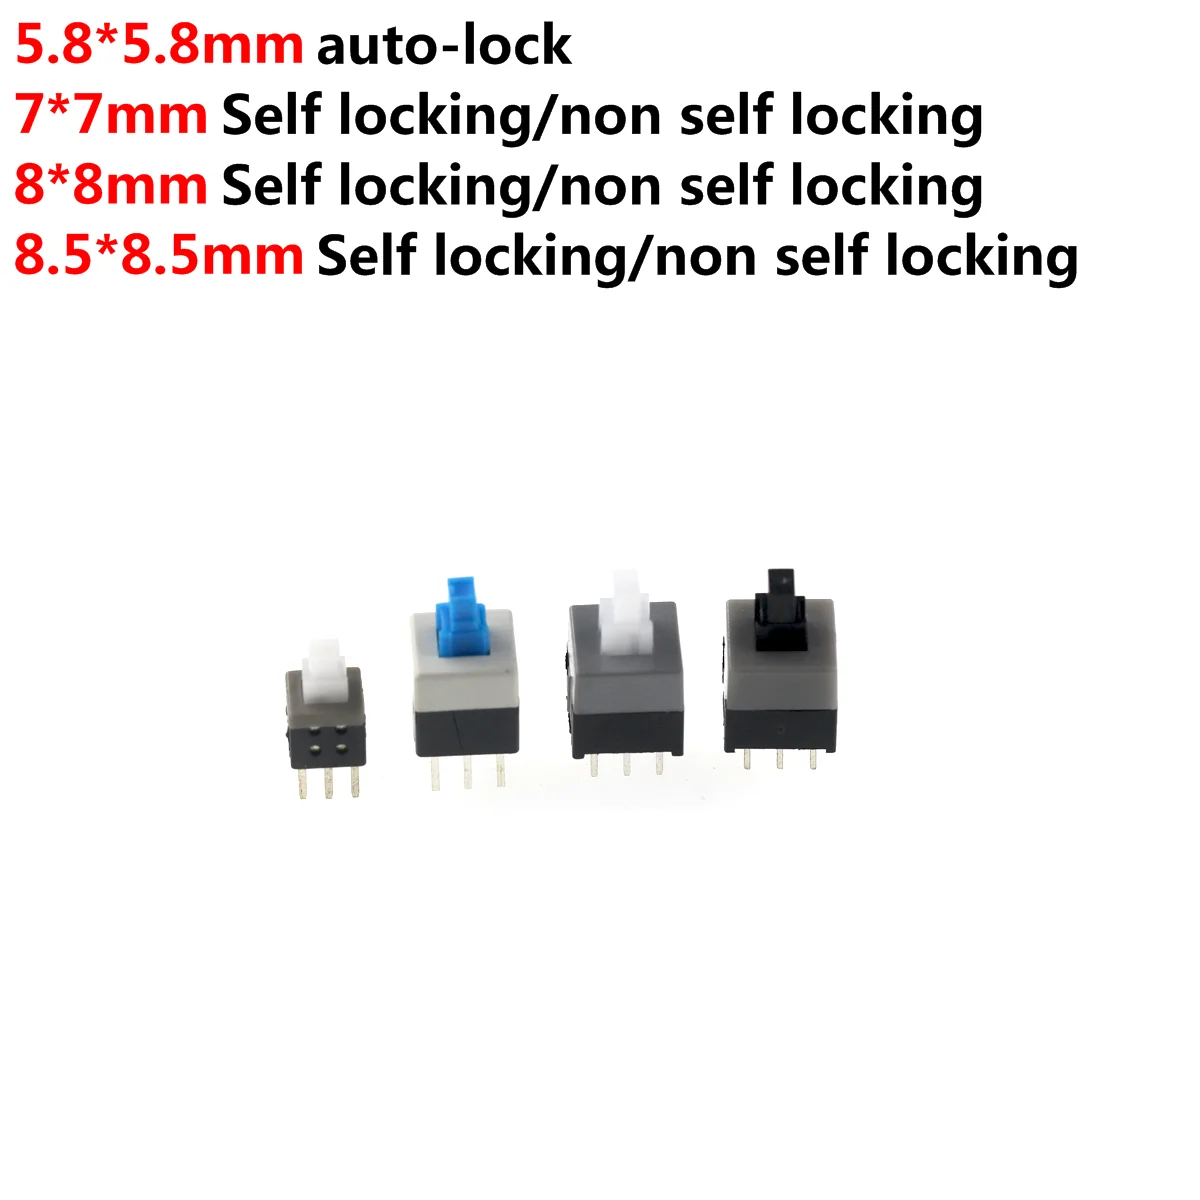 100PCS/LOT 5.8x5.8 7x7 8x8 8.5x8.5mm Self Locking / UNlock Push Tactile Power Micro Switch 6 Pin Button Switches micro switch tactile push button for chery cowin car remote control key button switches 6 3 2 5